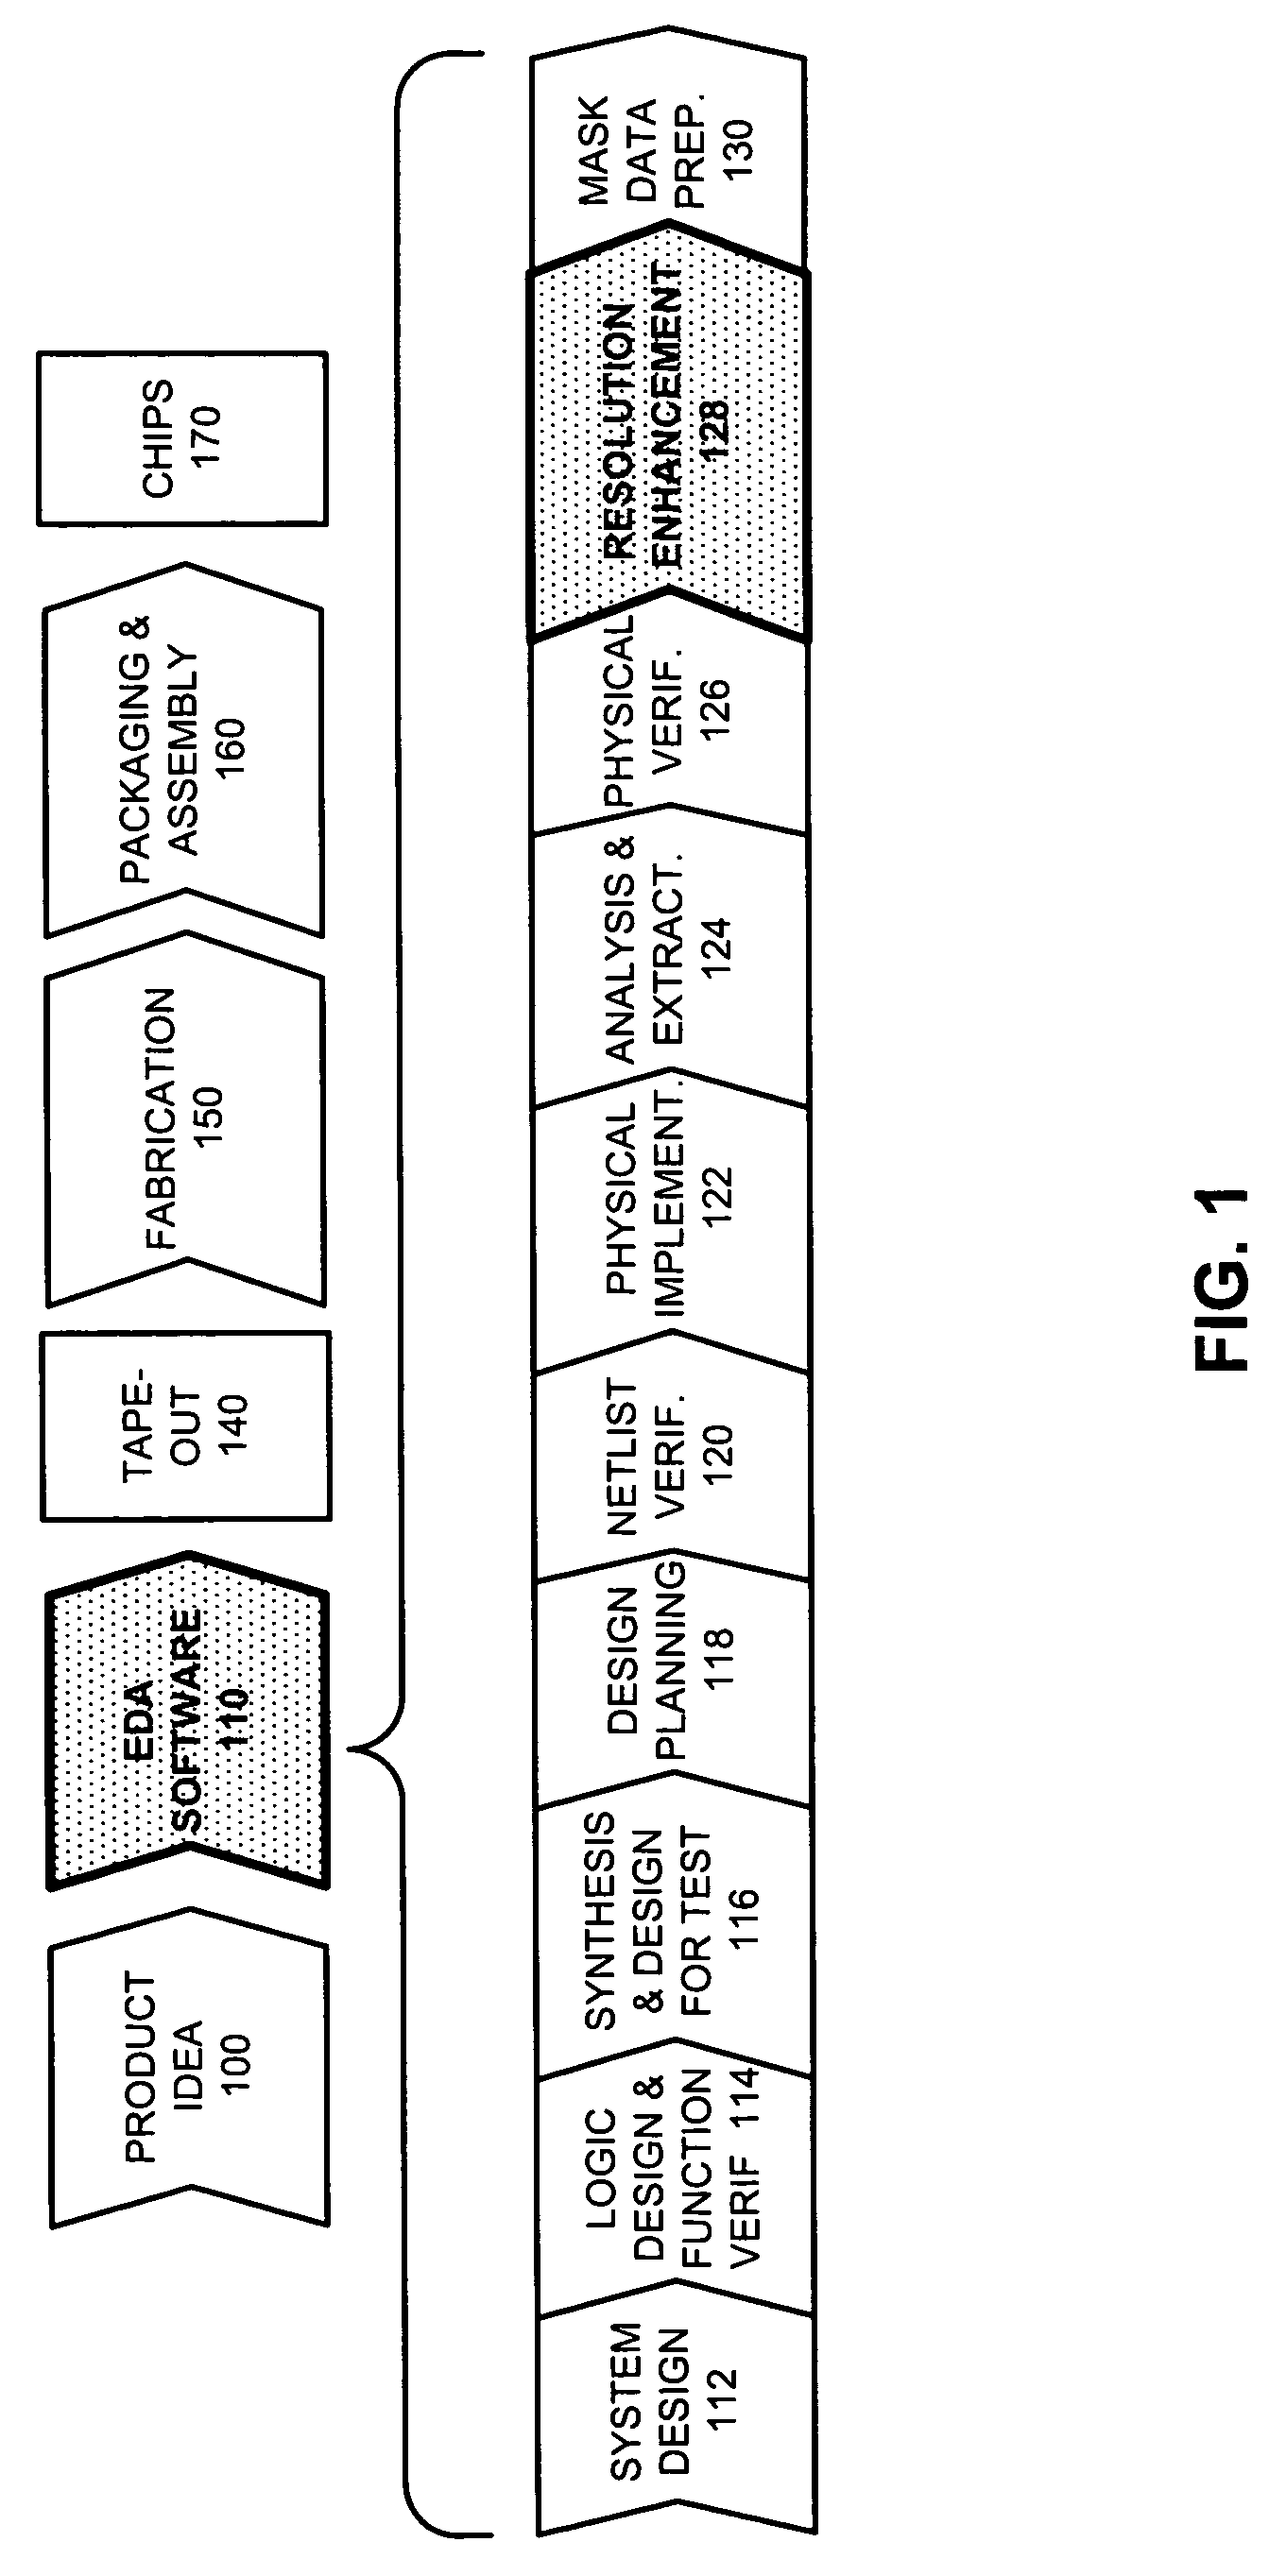 Method and apparatus for placing assist features by identifying locations of constructive and destructive interference